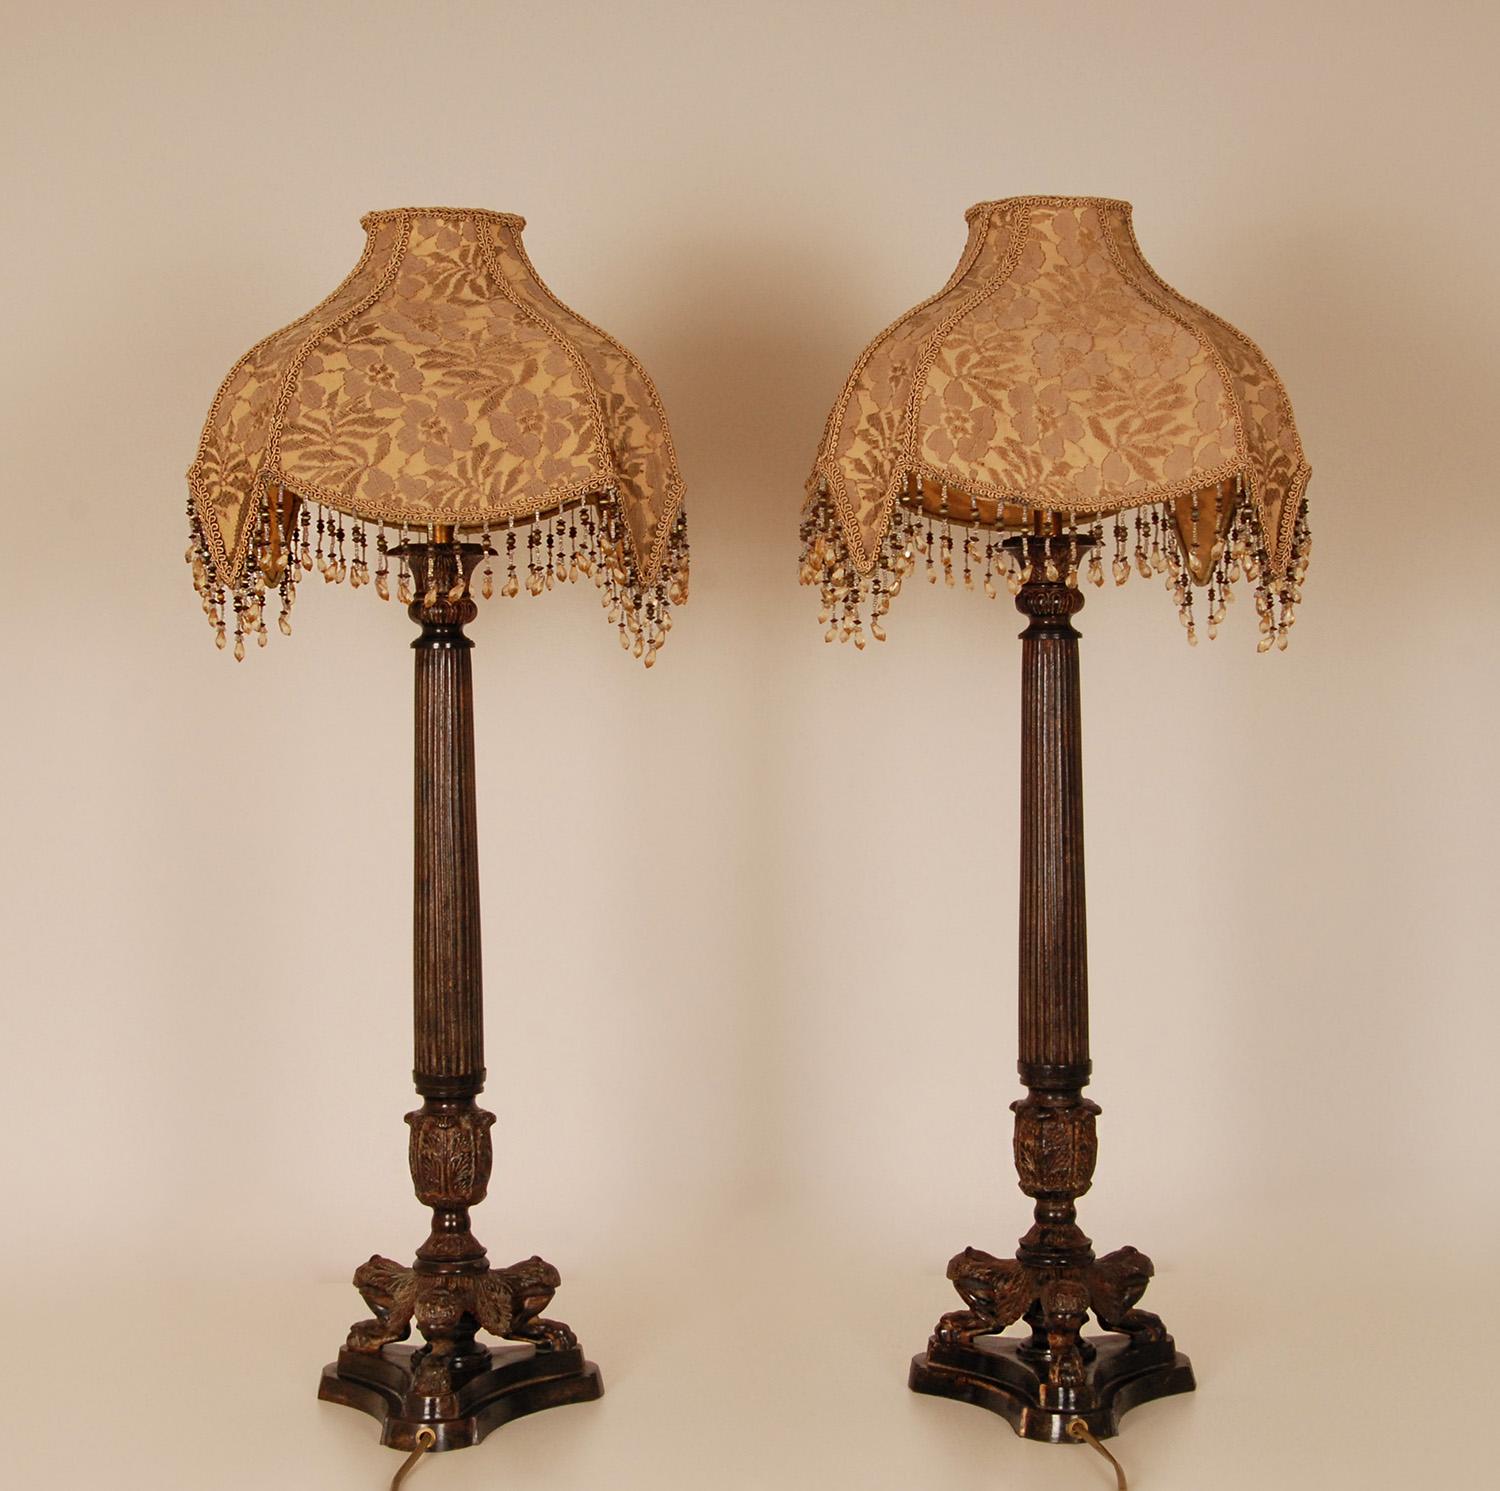 Antique French Empire Napoleonic Table Lamps Lion Paws Cast Iron a pair  For Sale 4